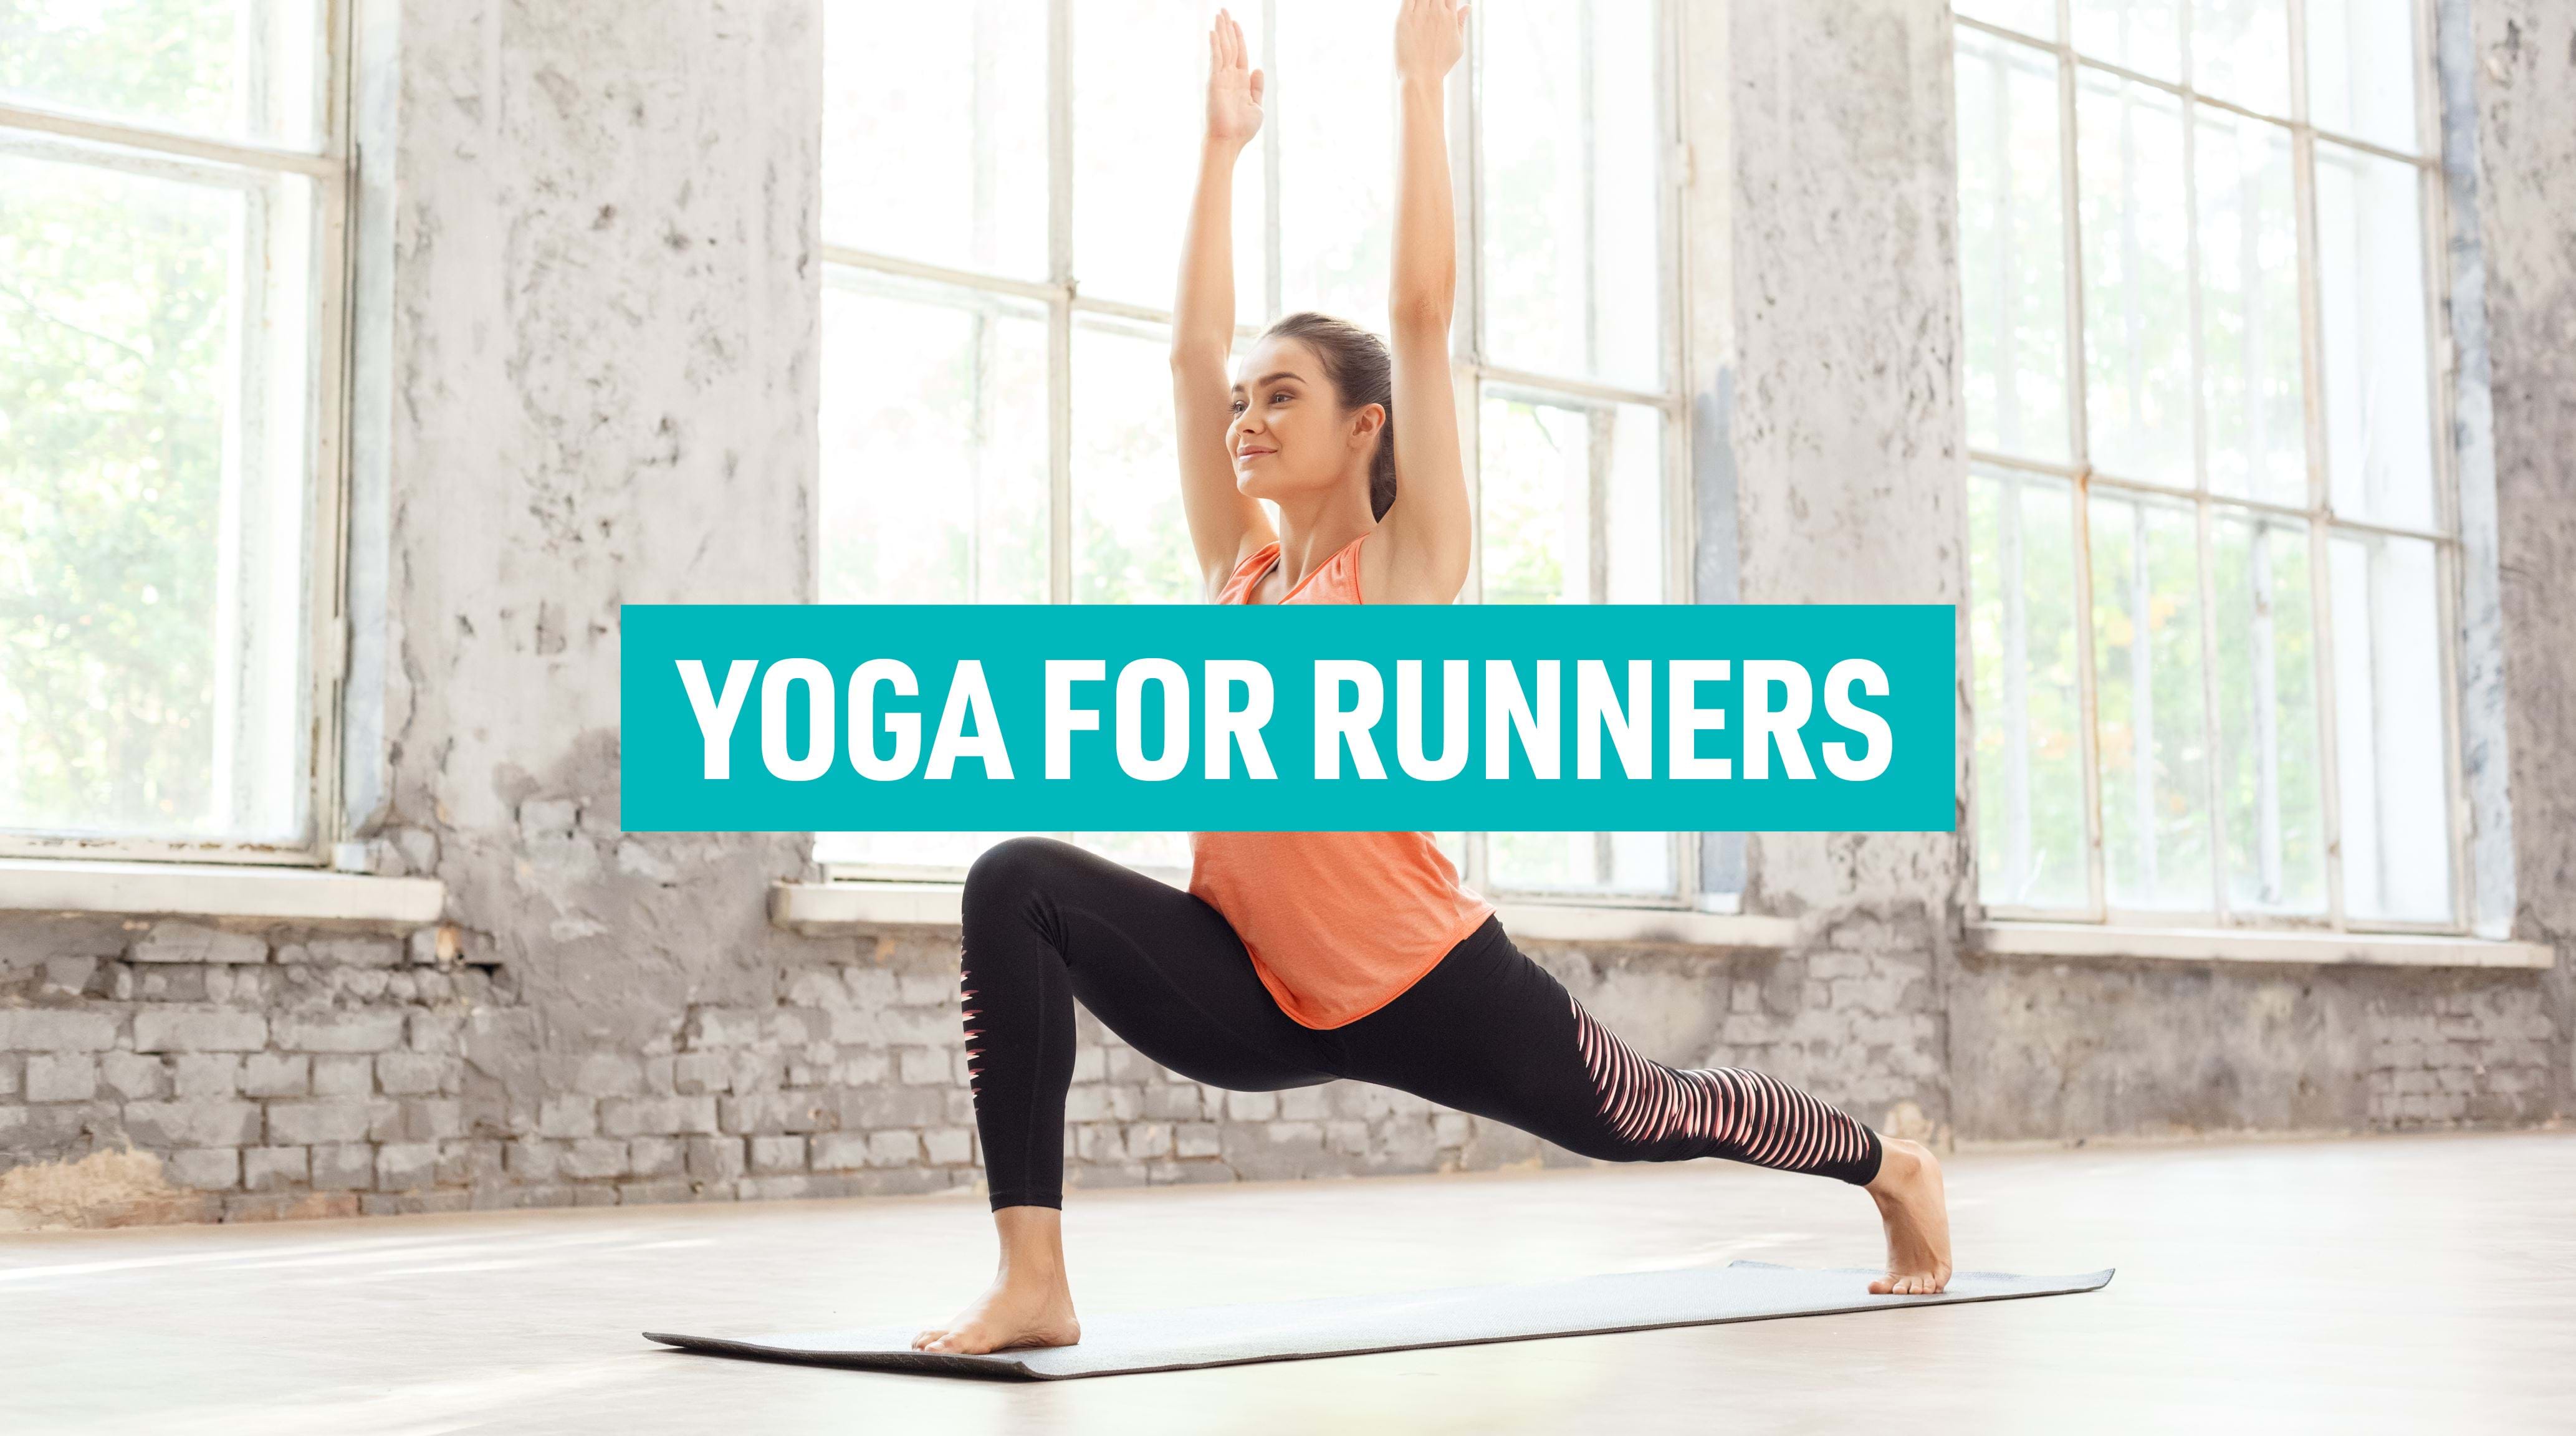 Yoga helps athletes of every age improve flexibility, balance and strength